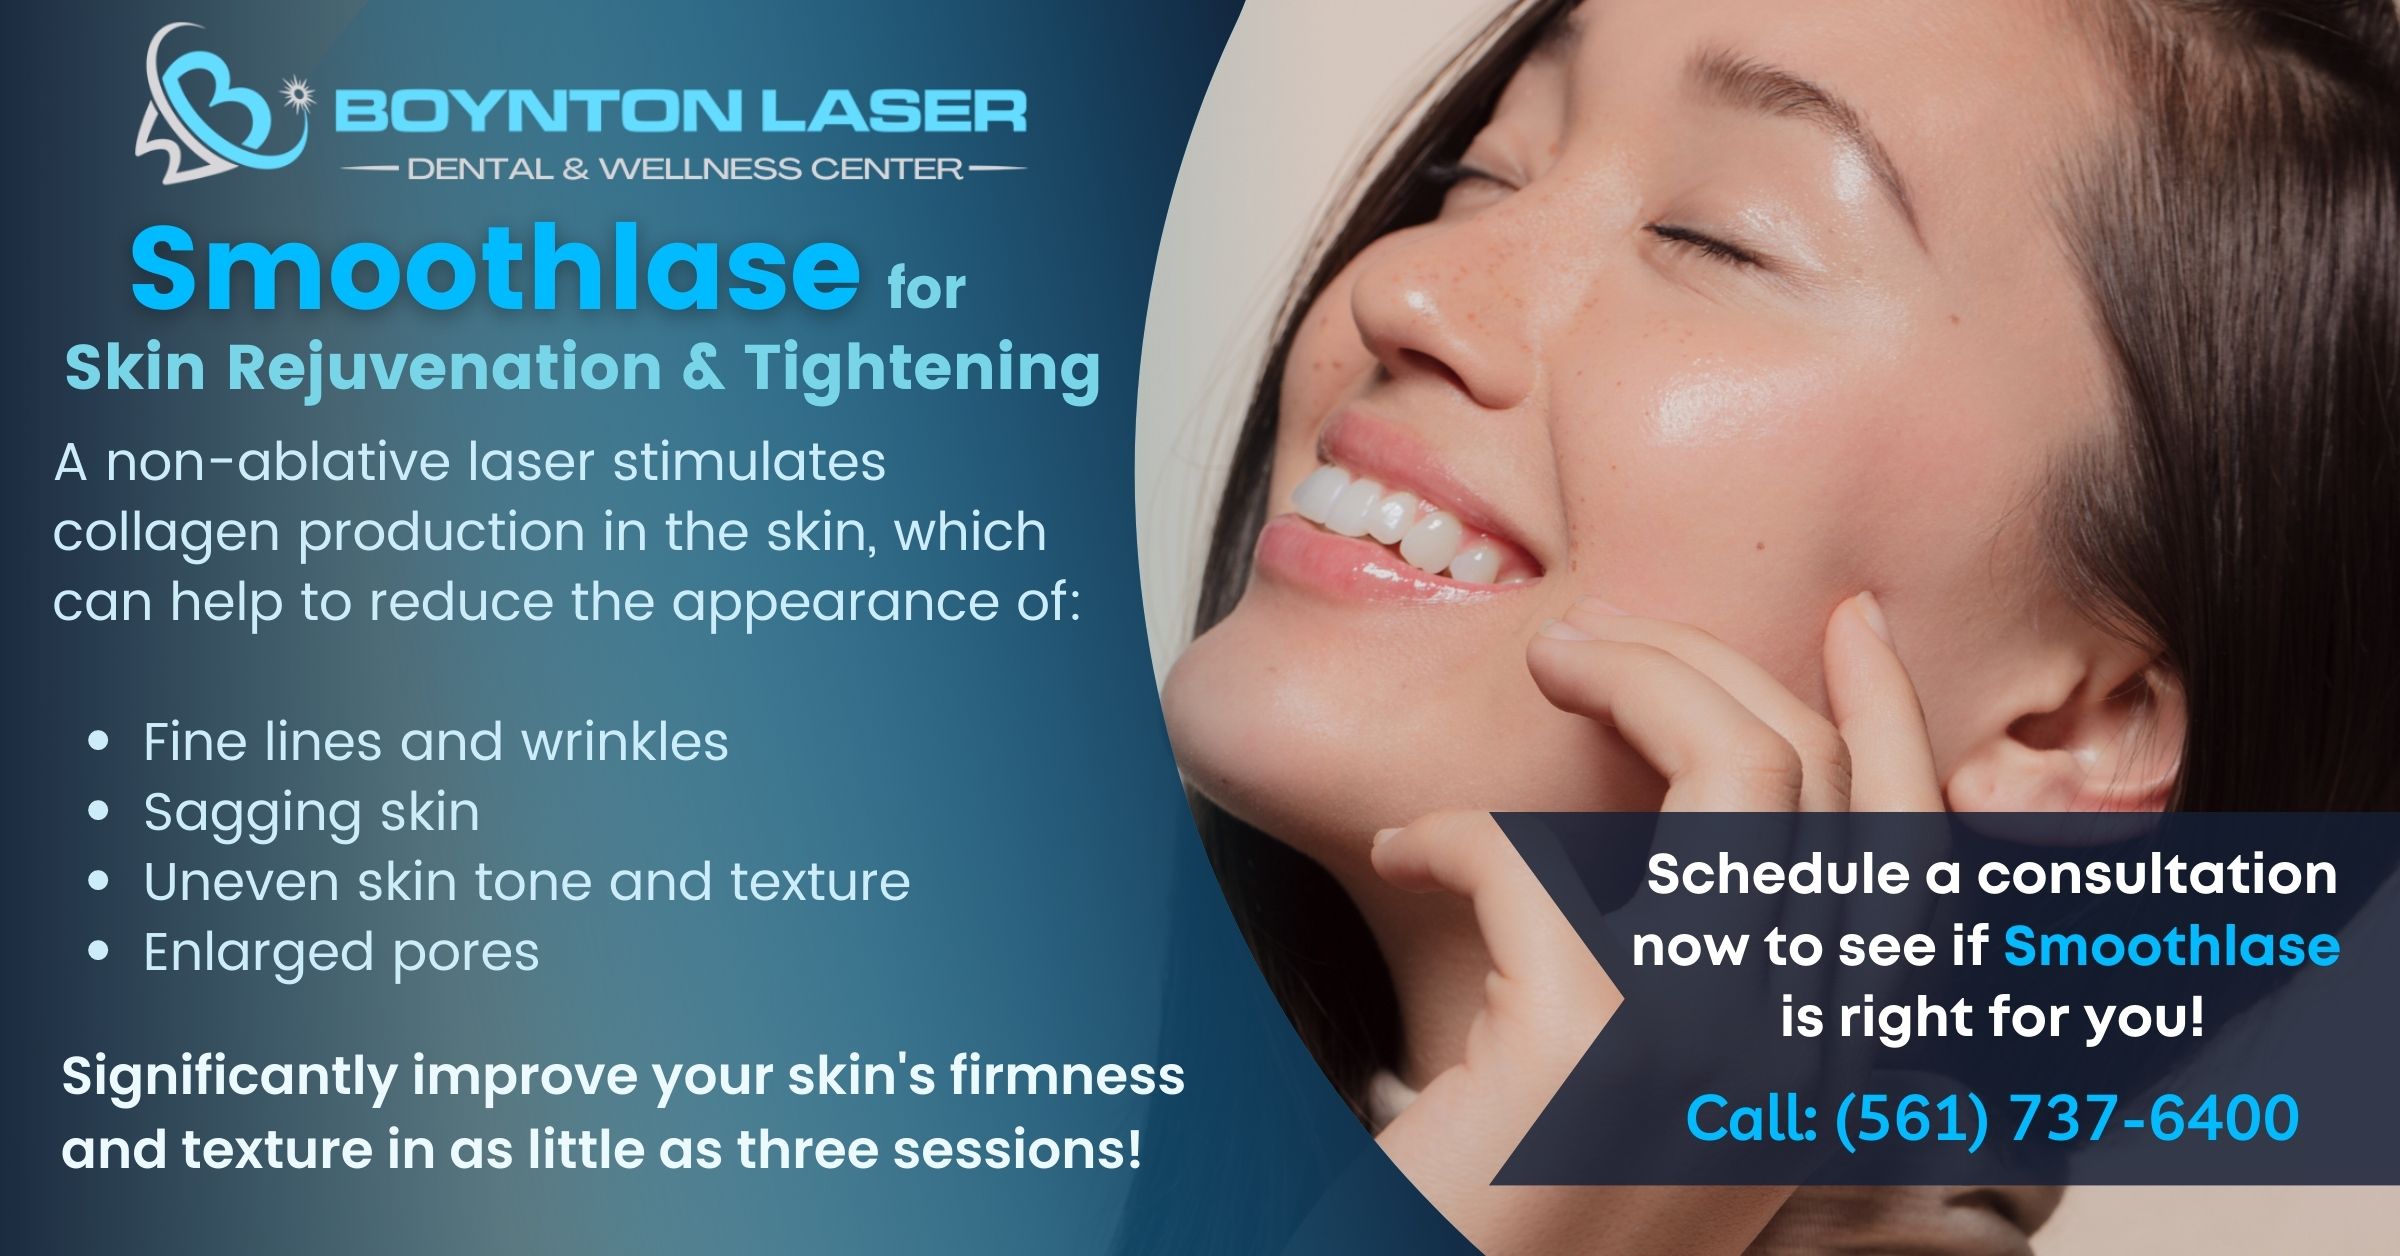 How to Know What Laser Treatment is Right for You